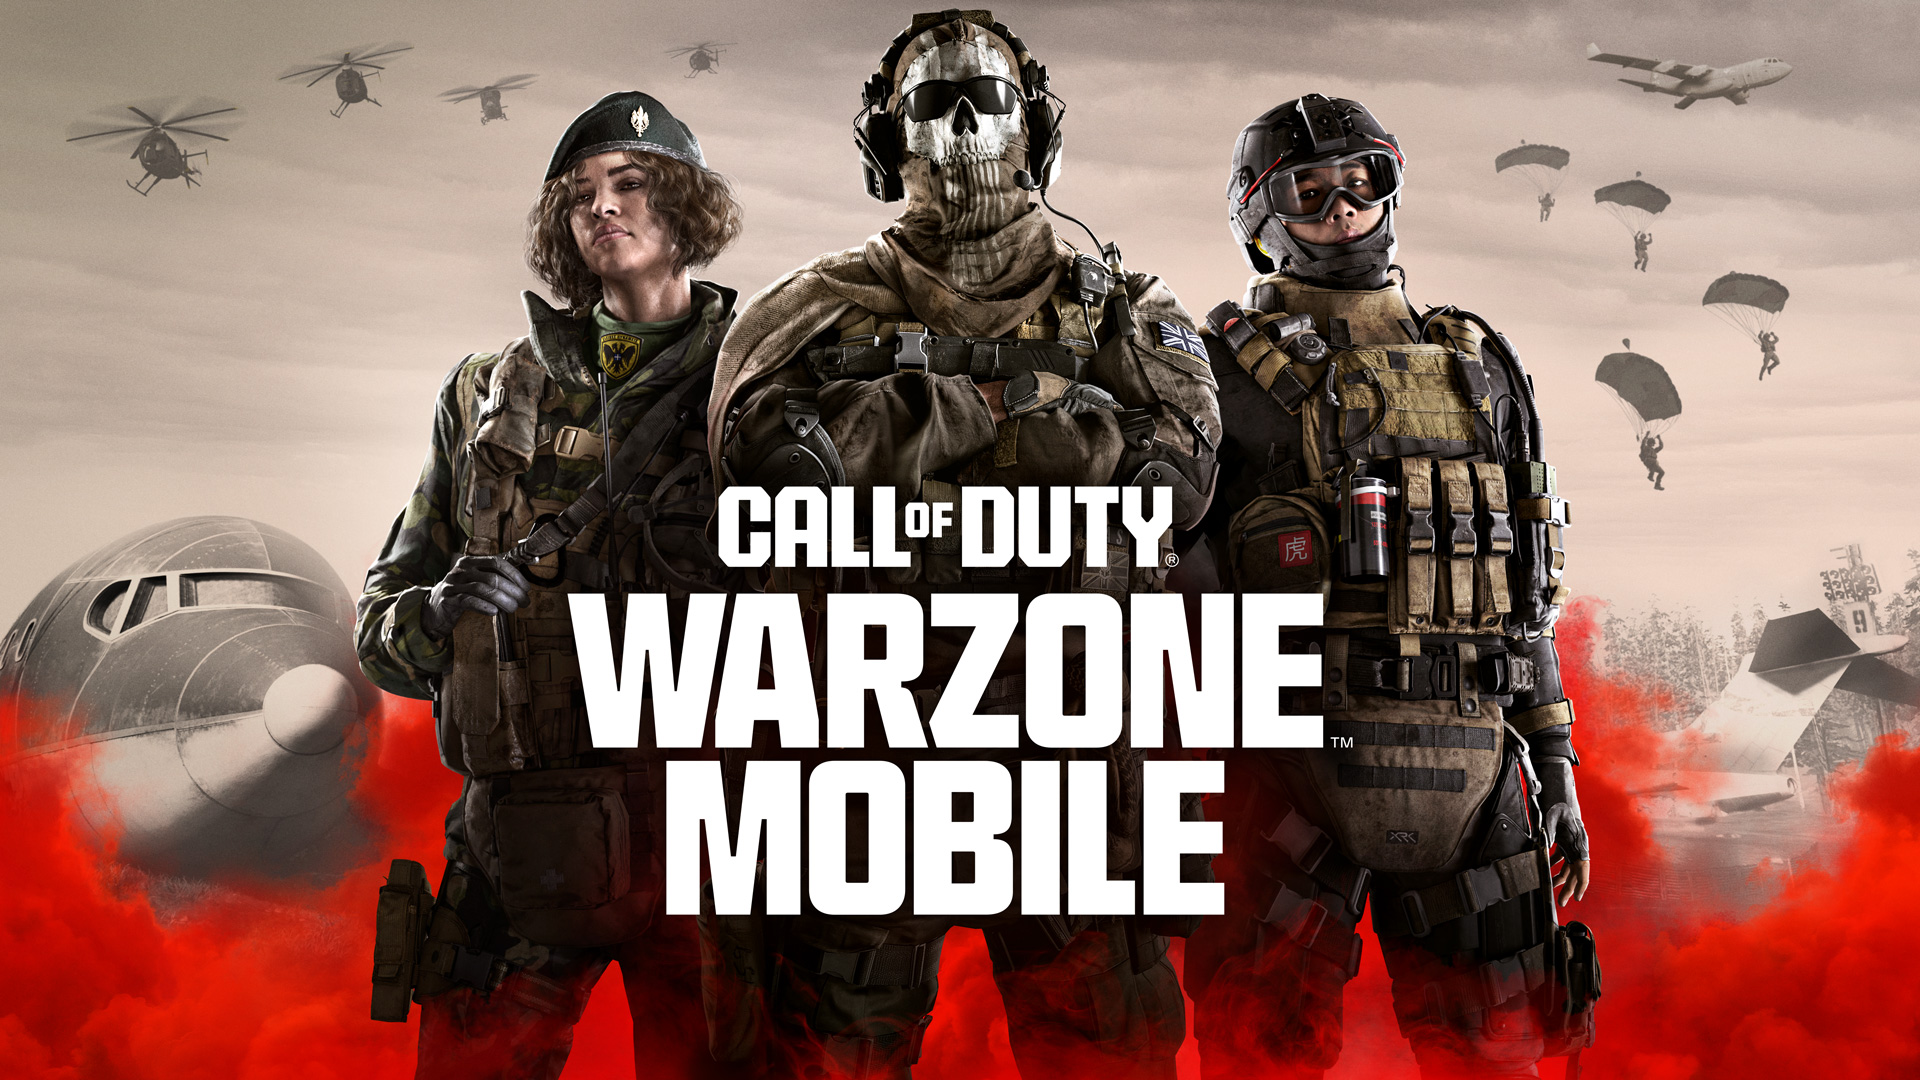 Warzone Mobile launches worldwide for iOS, Android in 